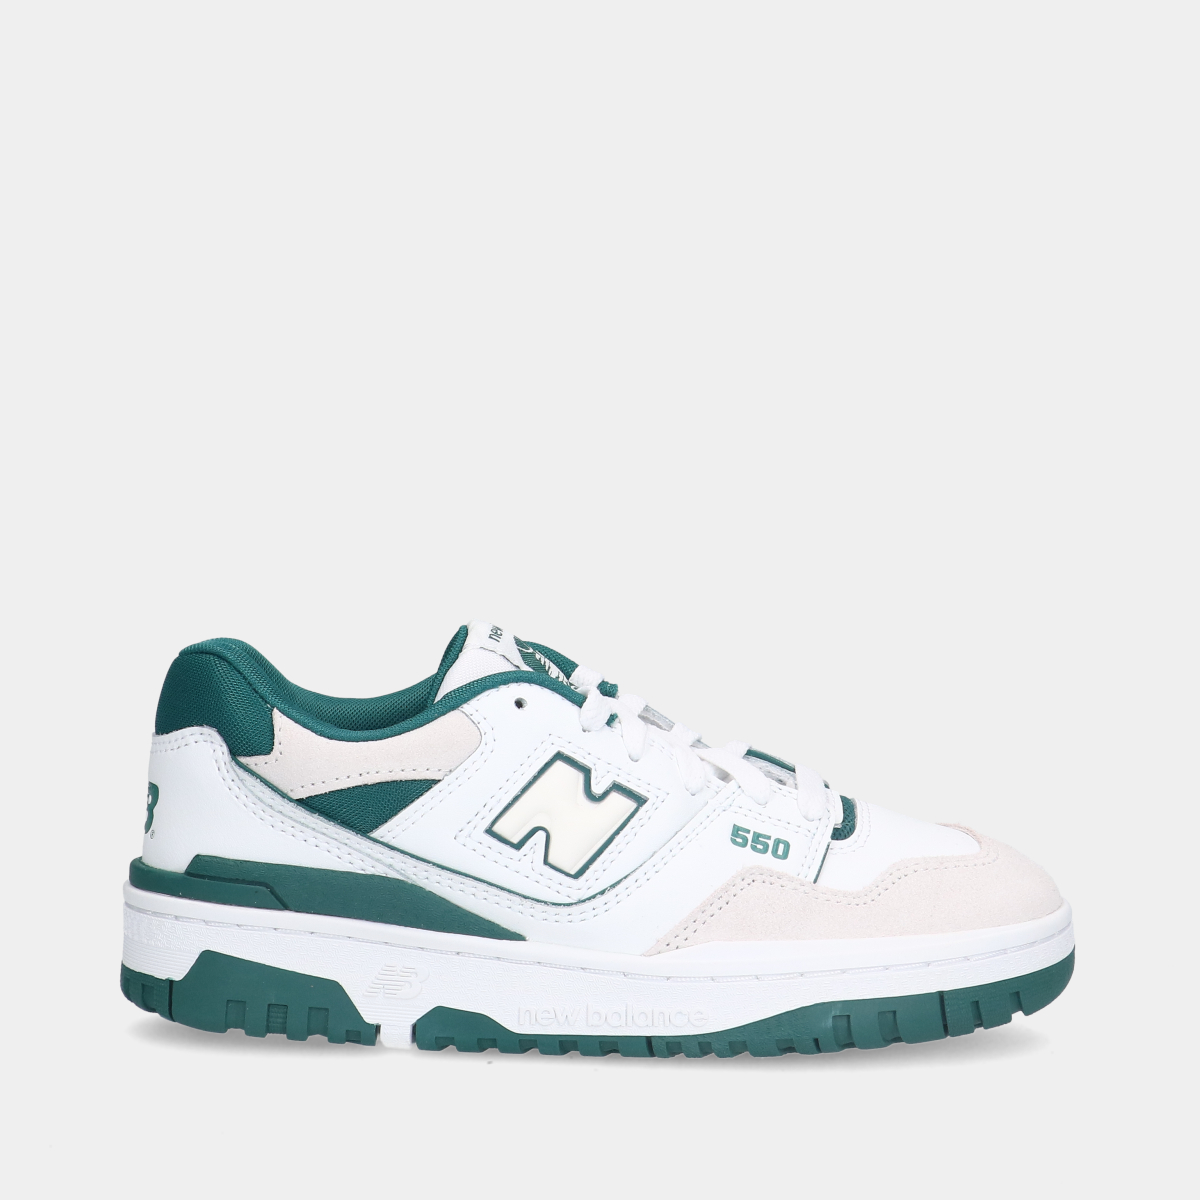 New Balance 550 White/Green dames sneakers